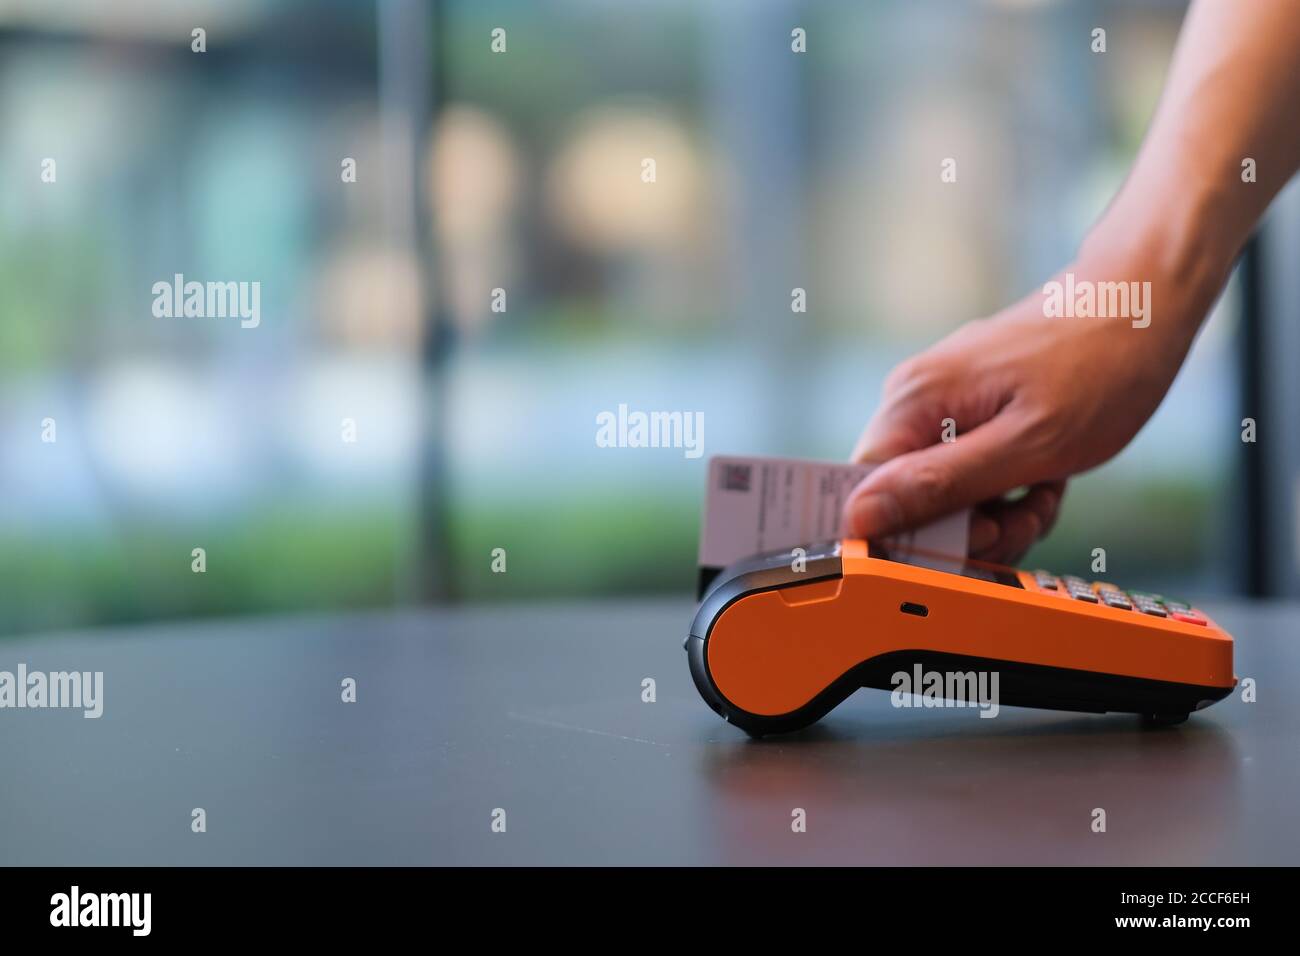 close up hands swiping the credit card on pos terminal. colorful bokeh background Stock Photo